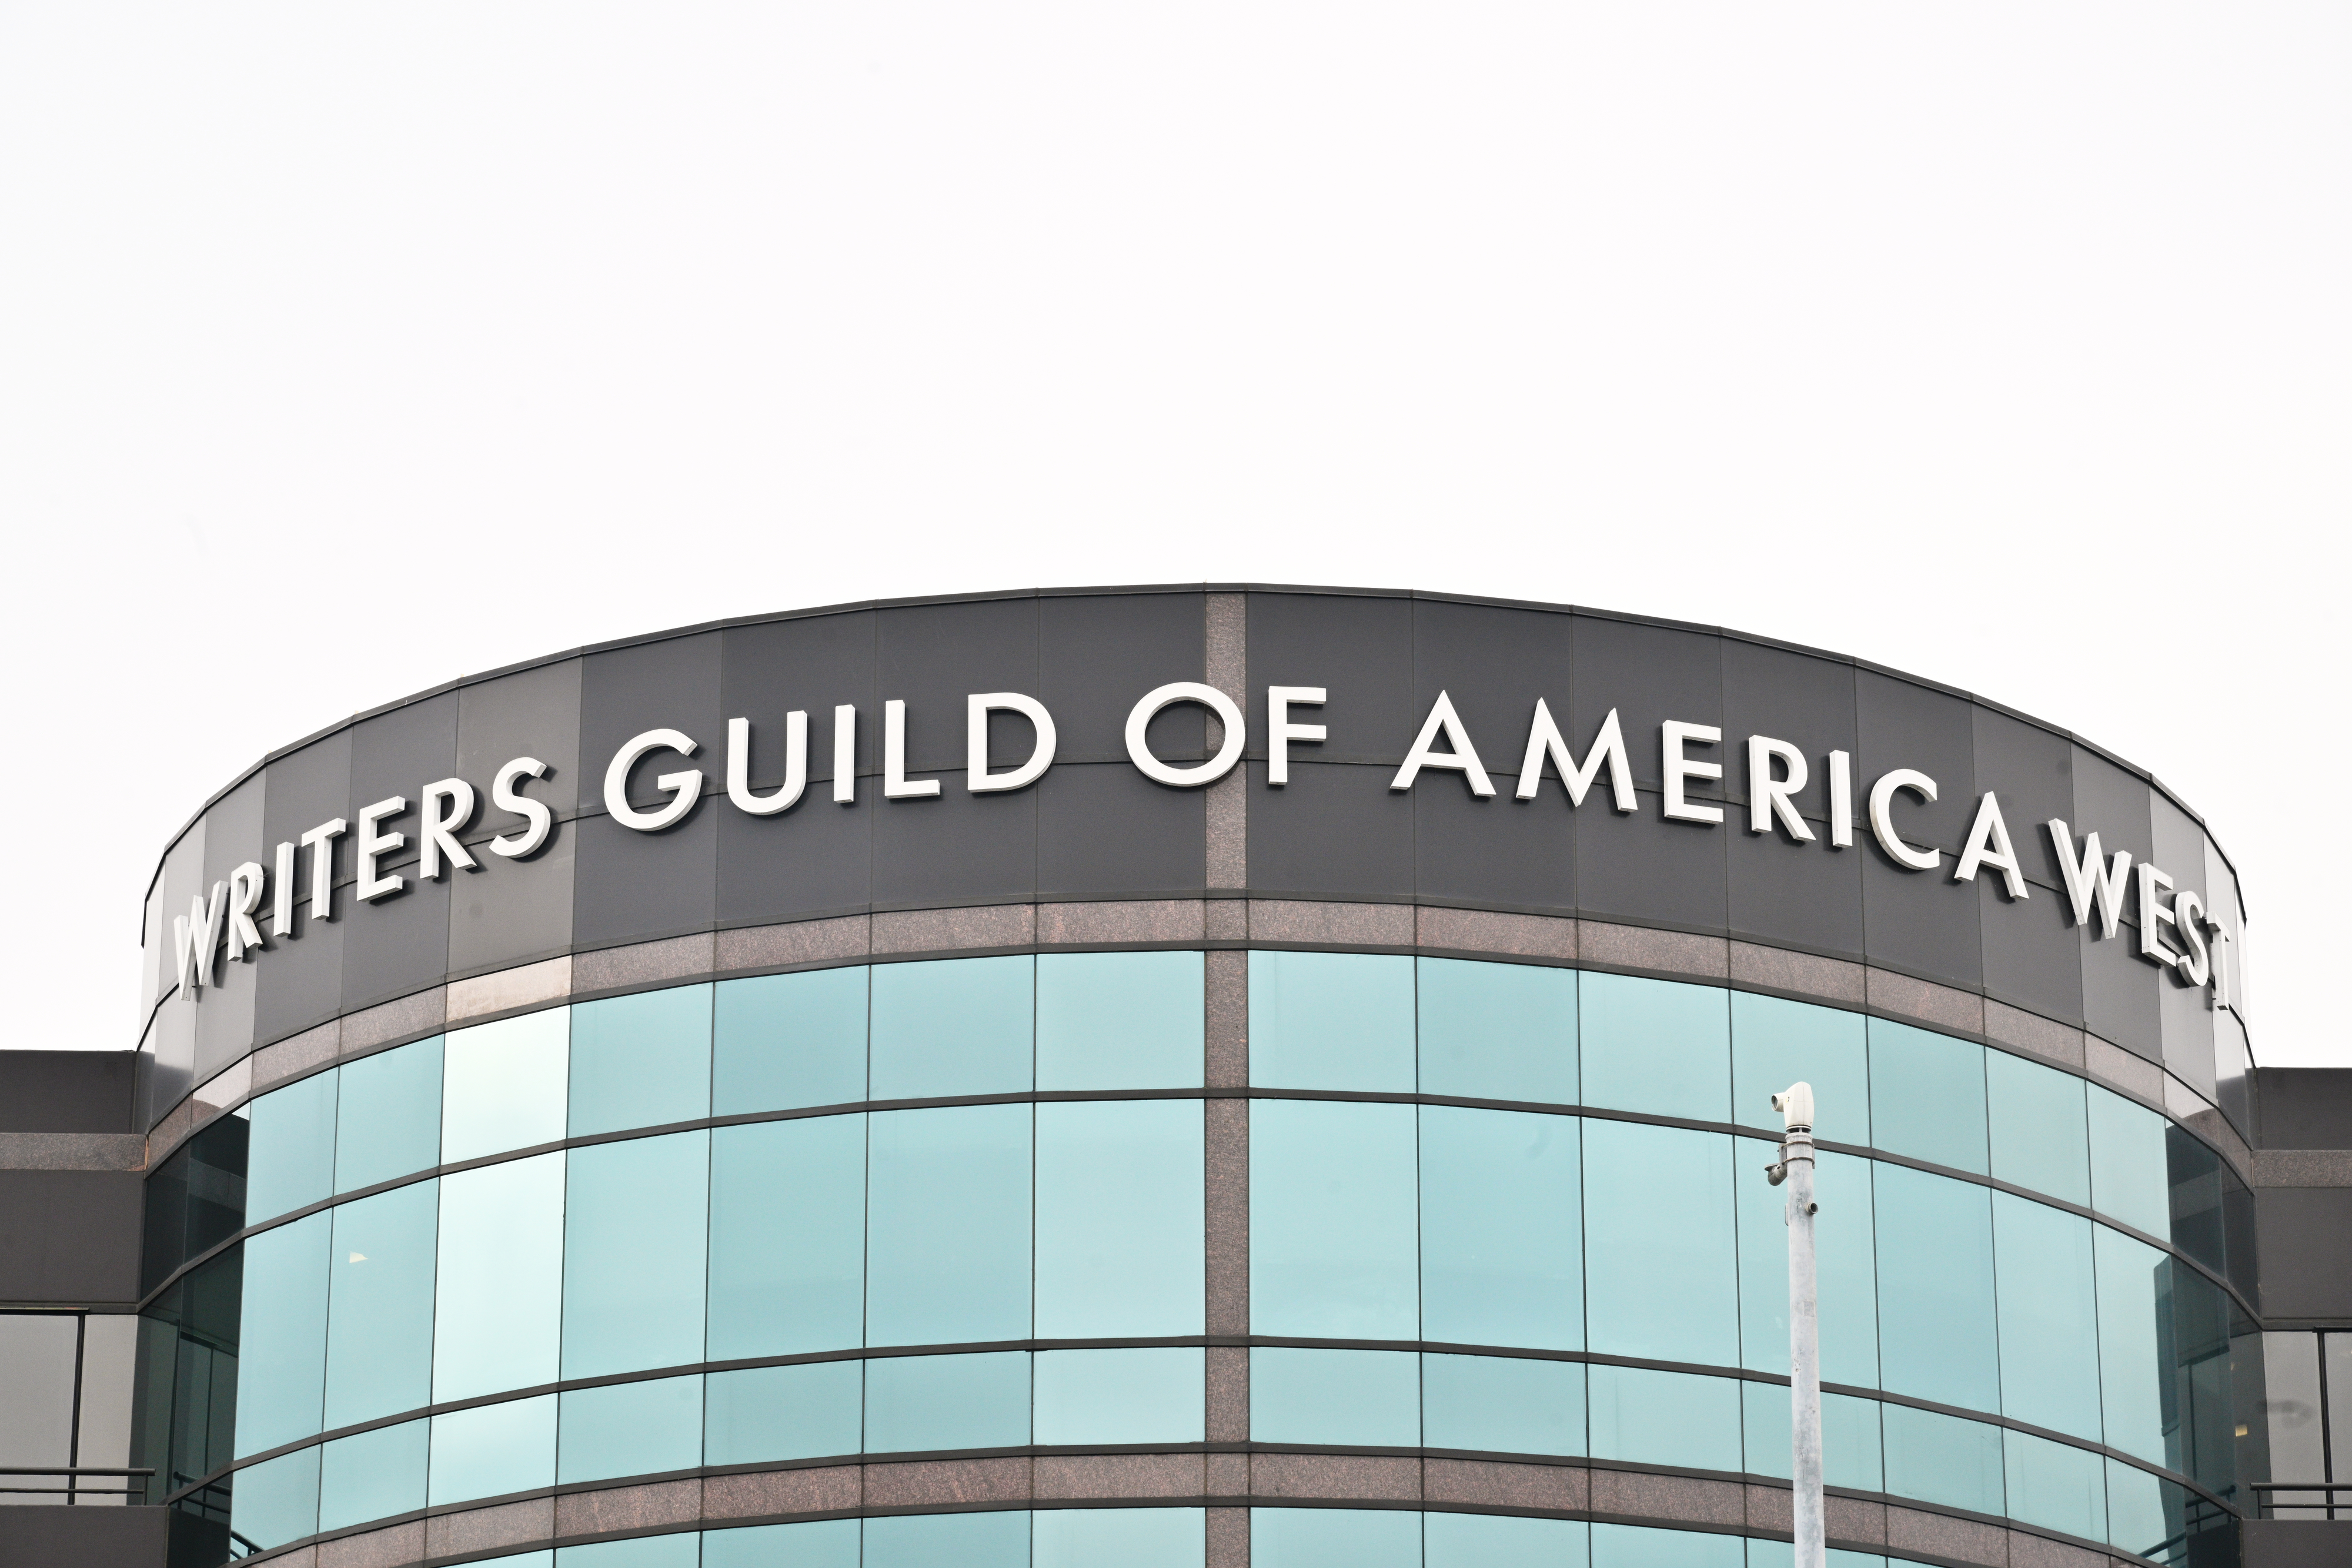 Writers Guild of America building